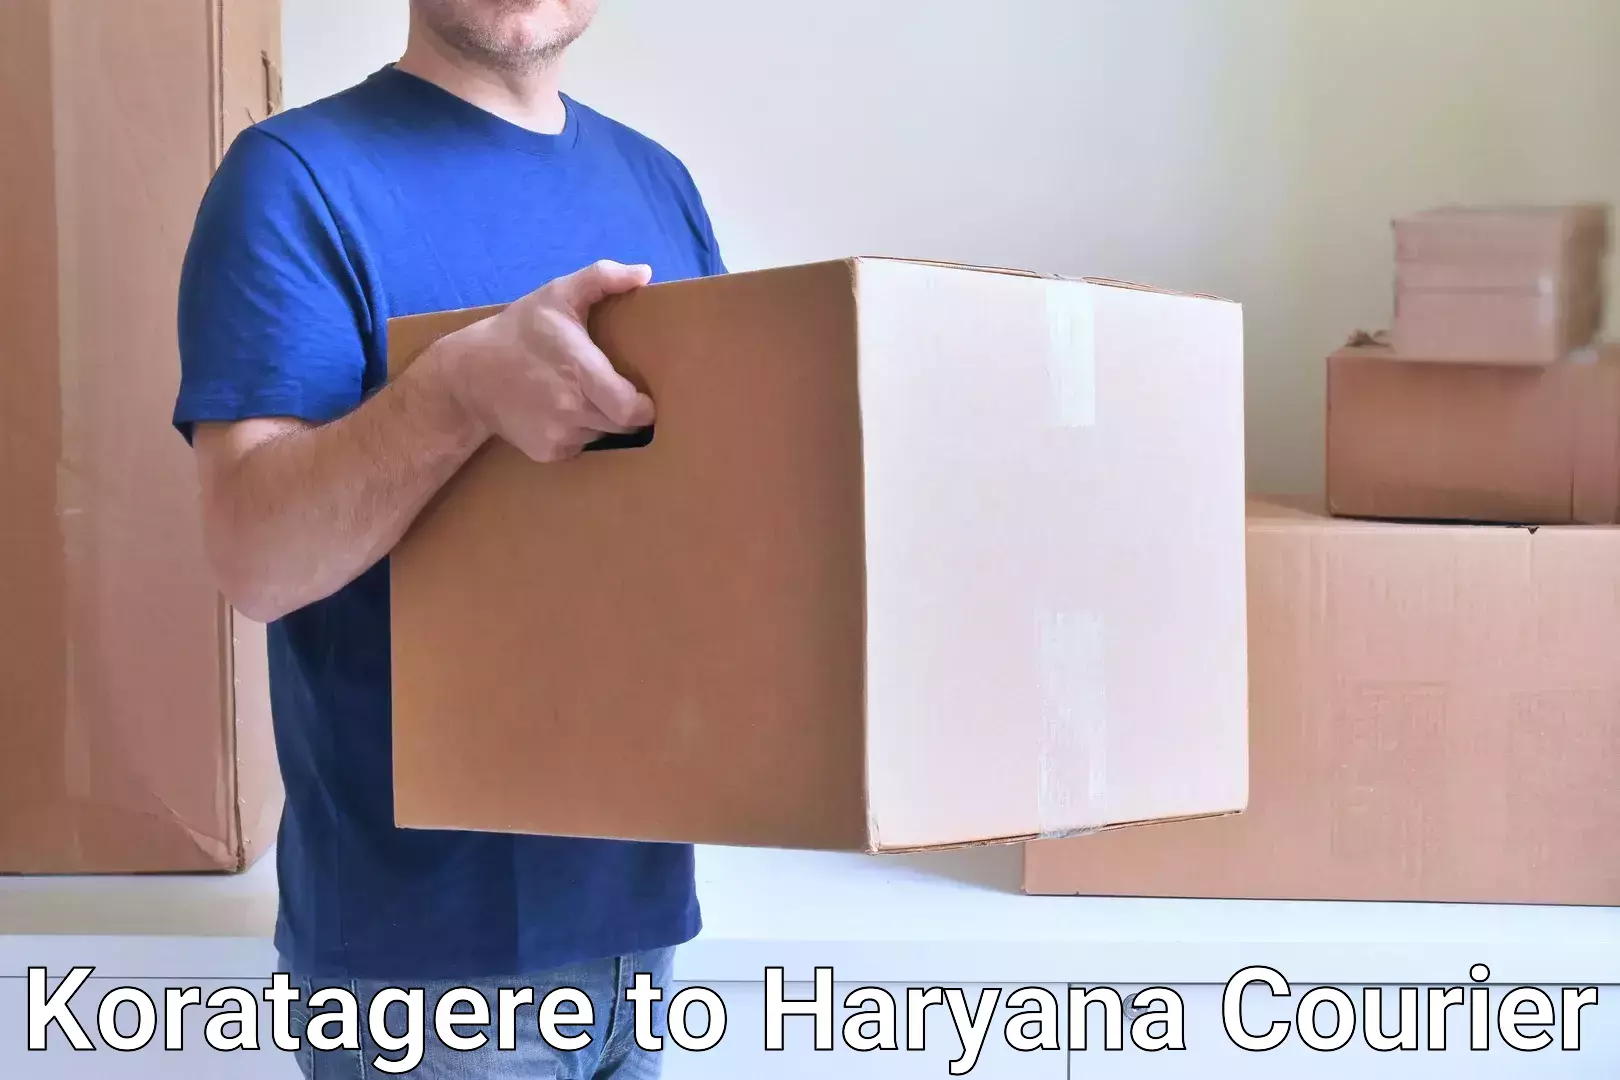 Reliable delivery network Koratagere to Bilaspur Haryana